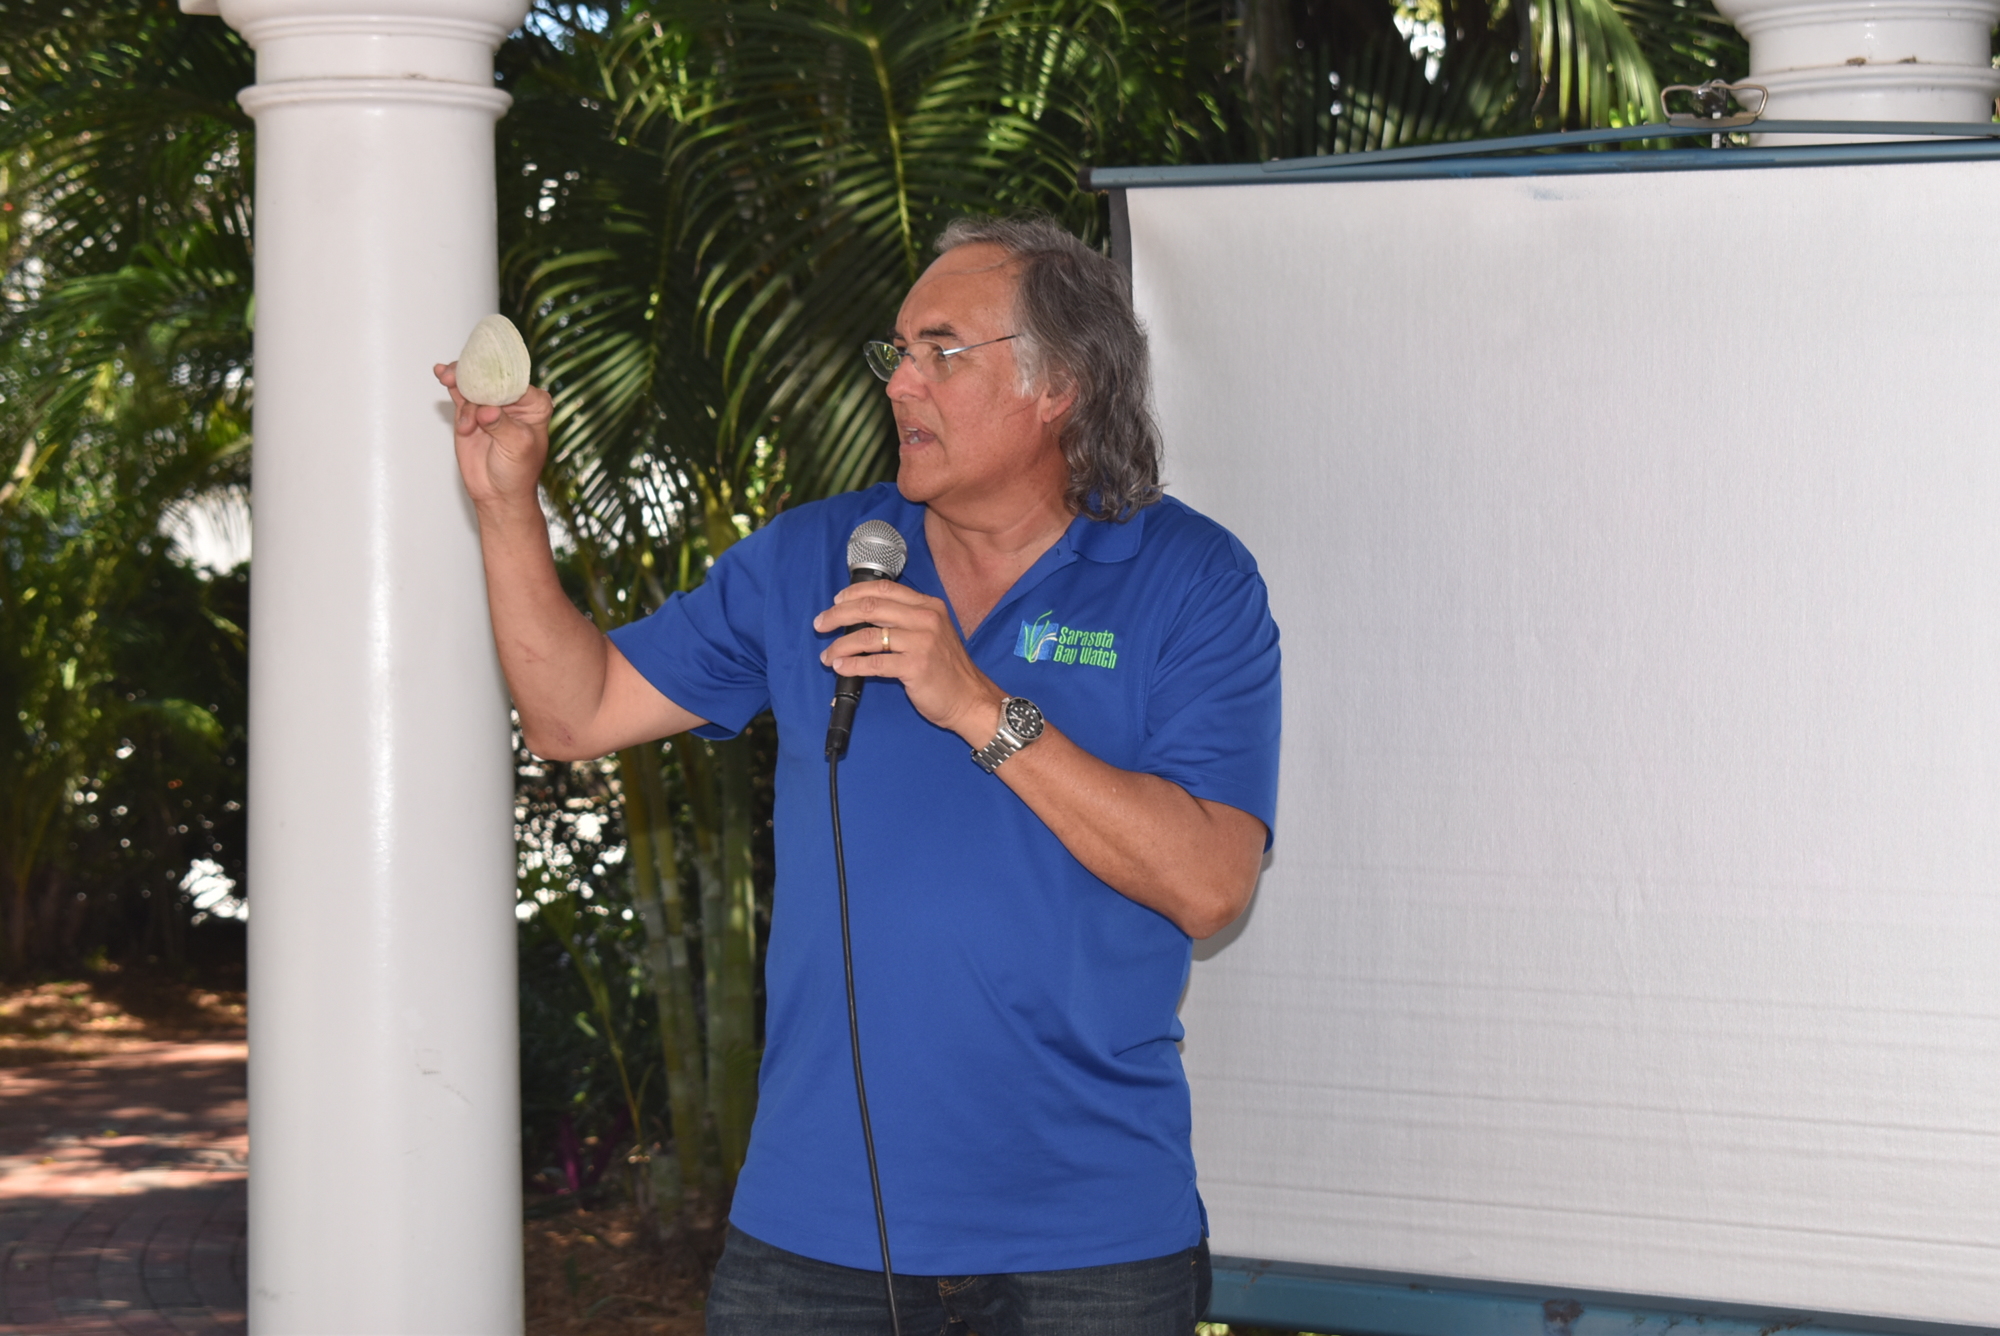 Ernesto Lasso de la Vega from Sarasota Bay Watch gave a talk about the organization's efforts to repopulate the bay with clams.